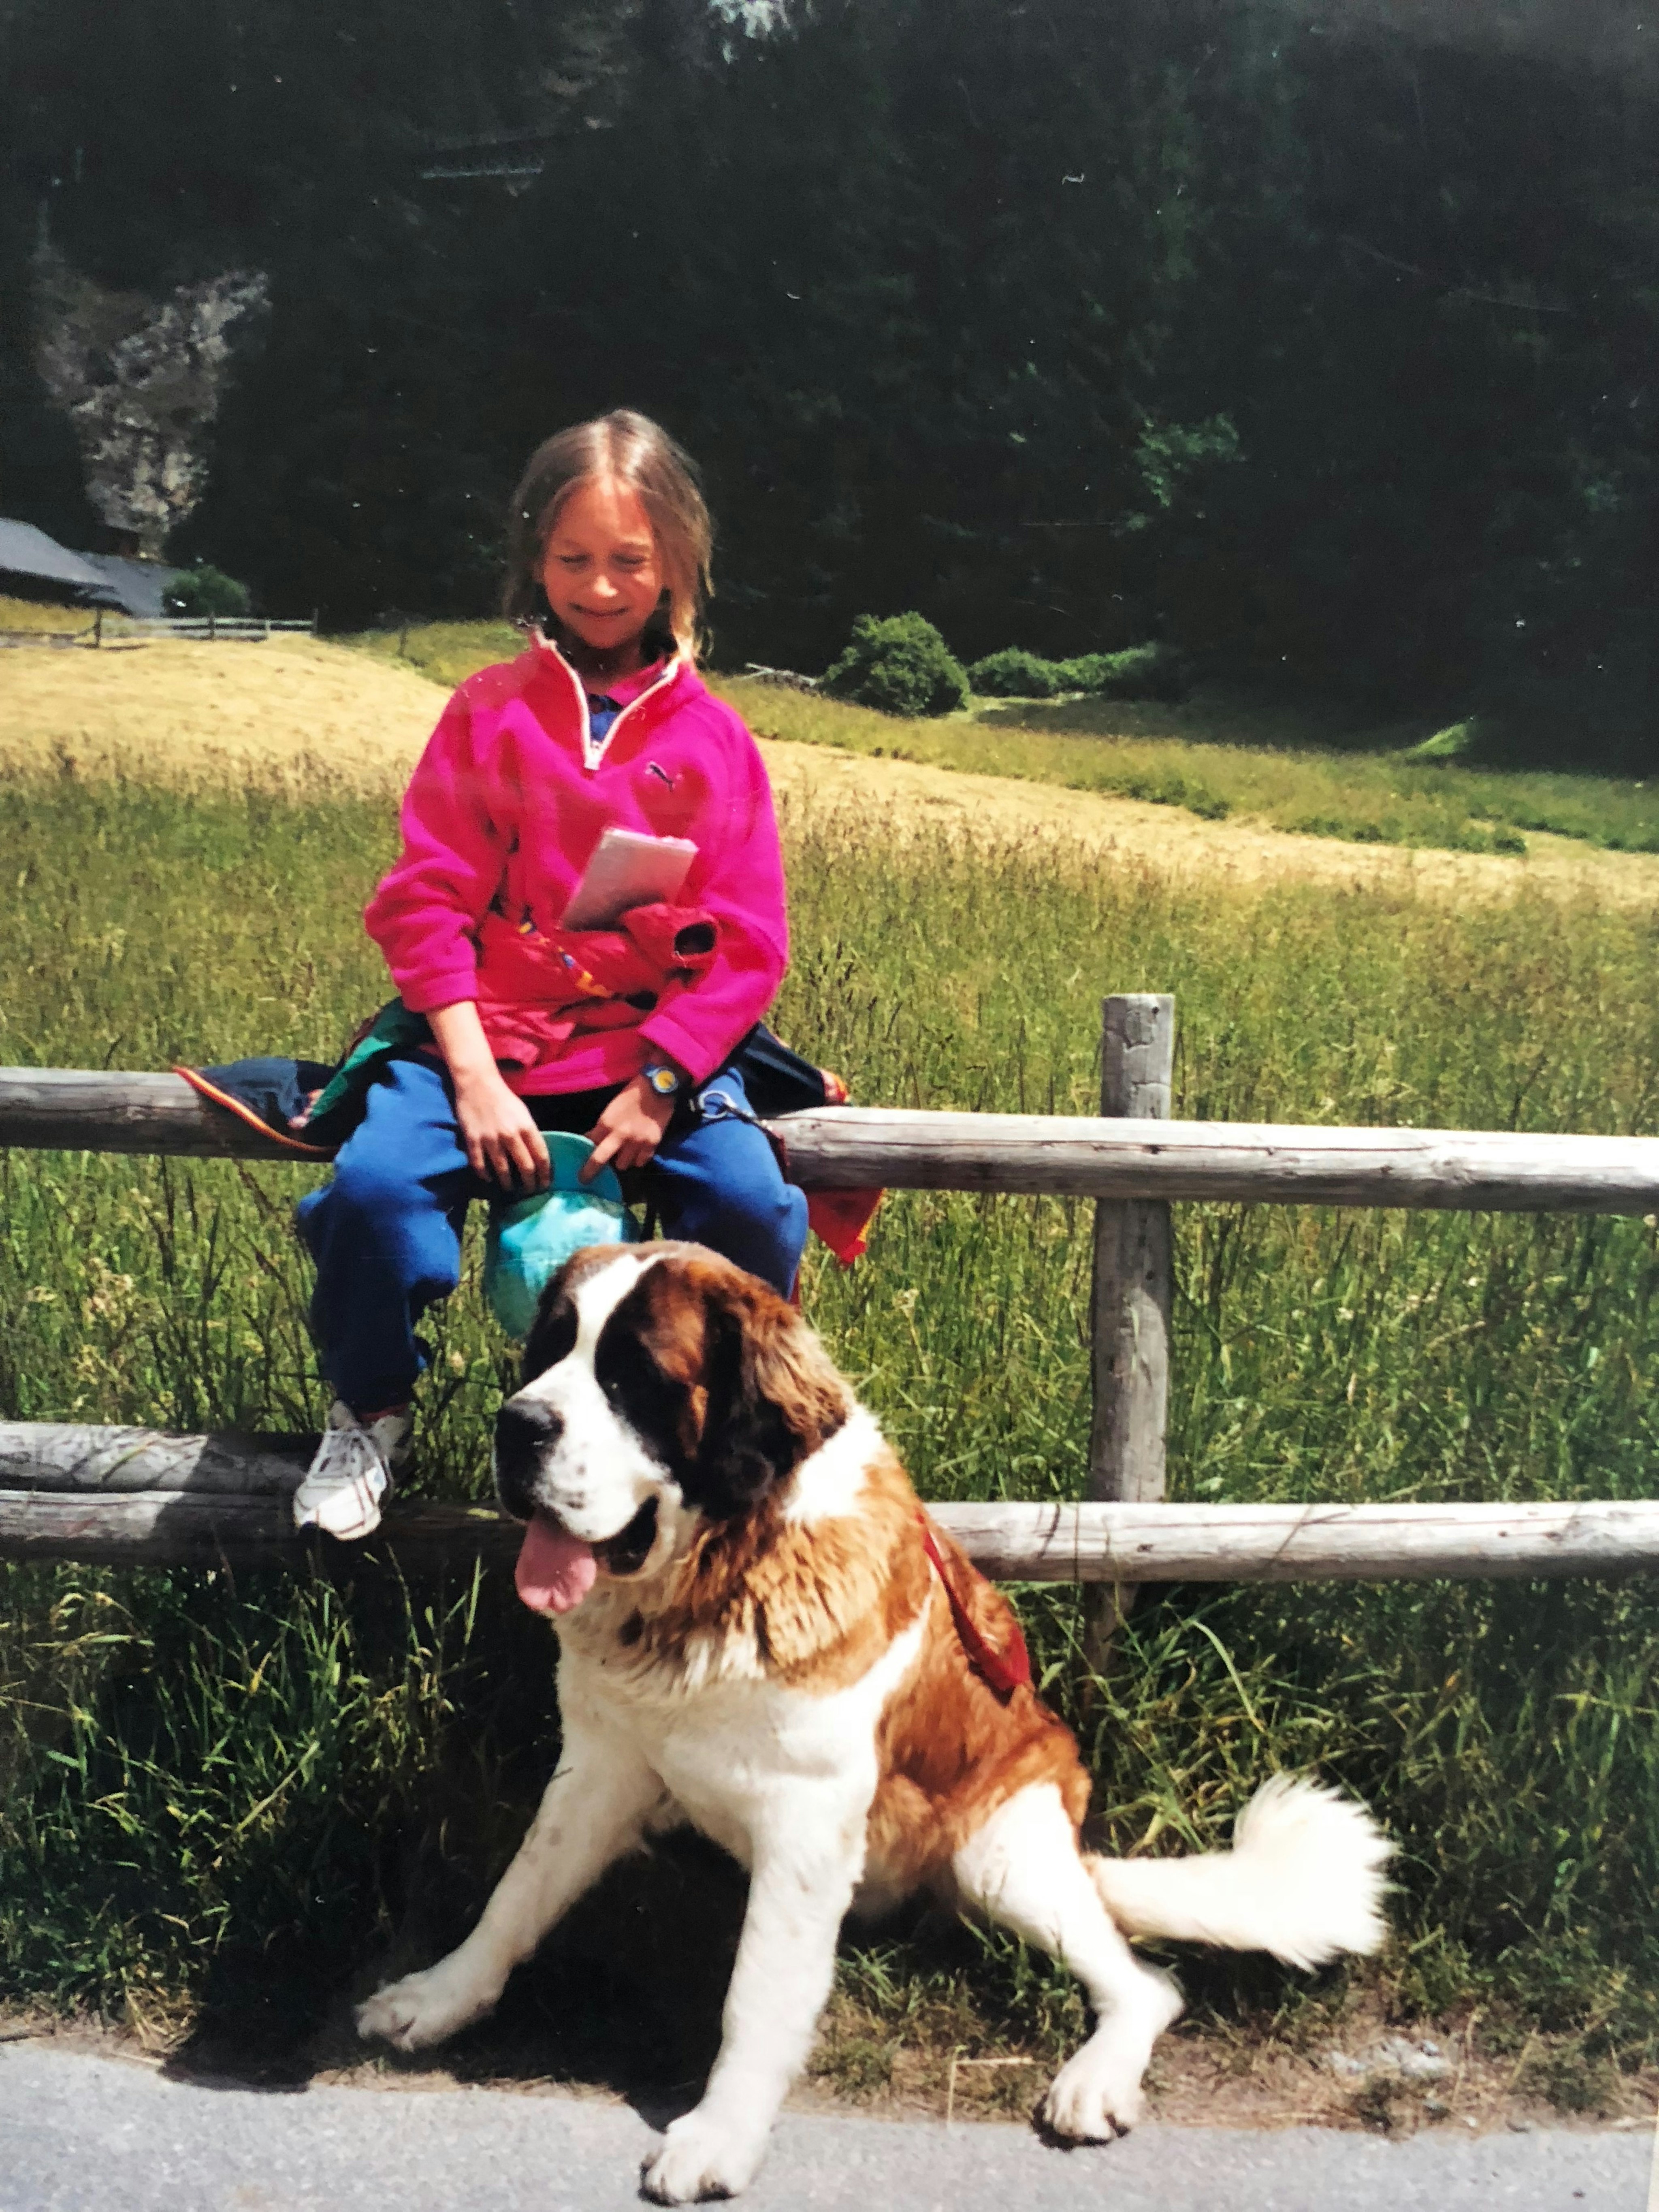 Small child sits on a fence, in front of her sits a big dog.